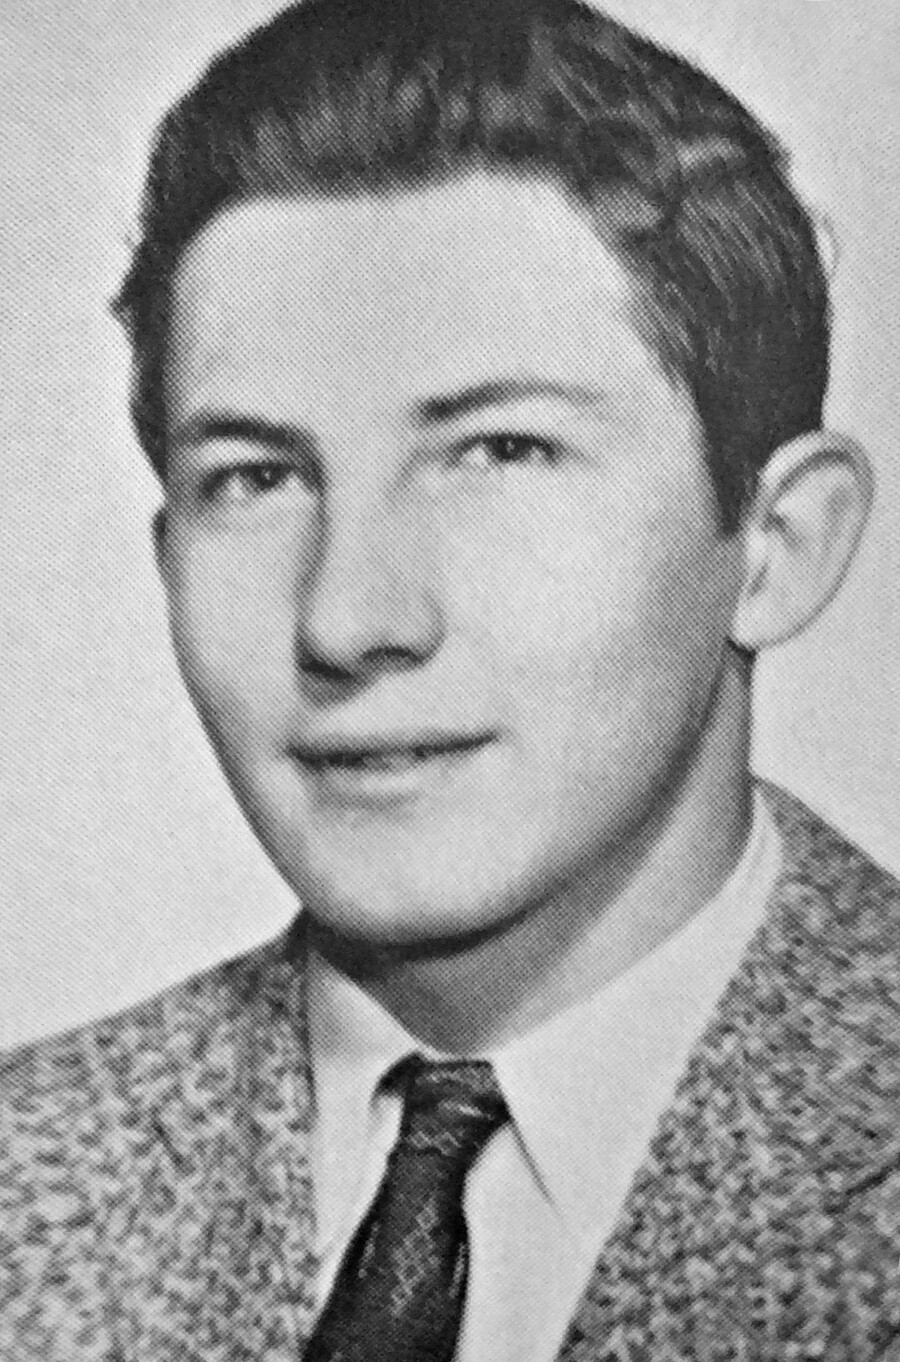 A young Aldrich Ames in the 1958 McLean High School yearbook.
